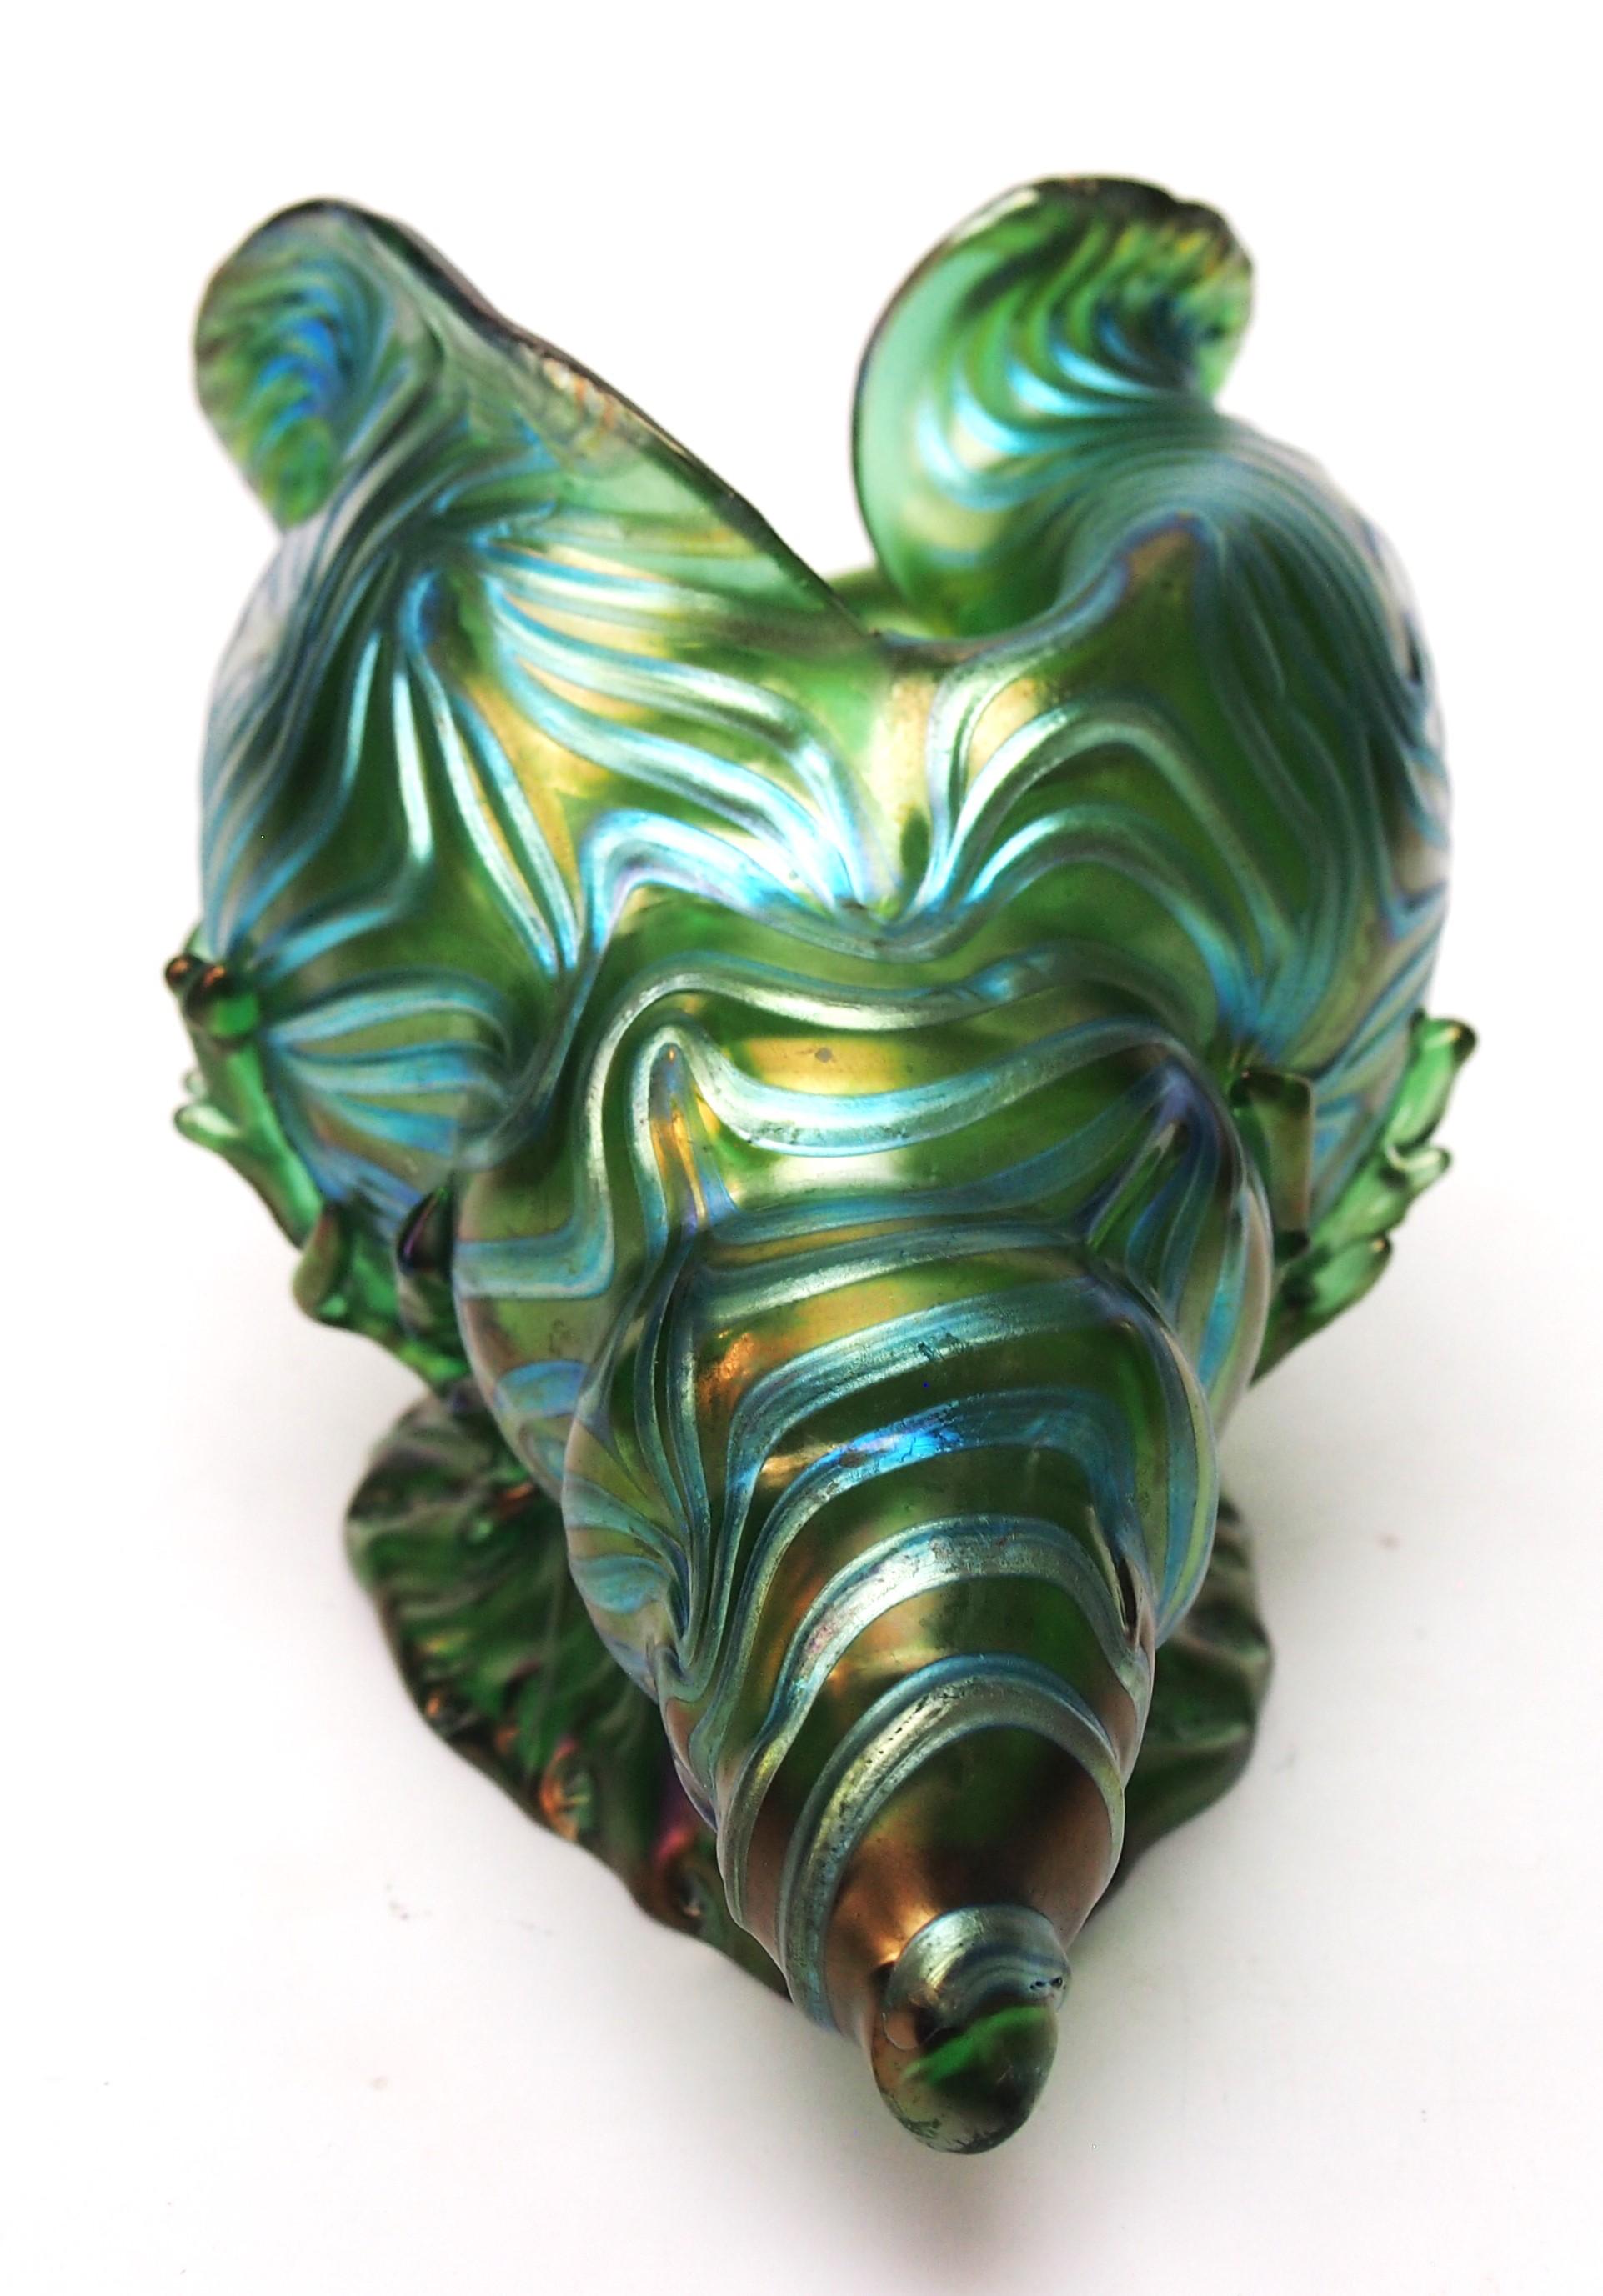 Stunning Loetz Crete Formosa Glass Seashell Vase in green and blue1902 In Good Condition For Sale In Worcester Park, GB